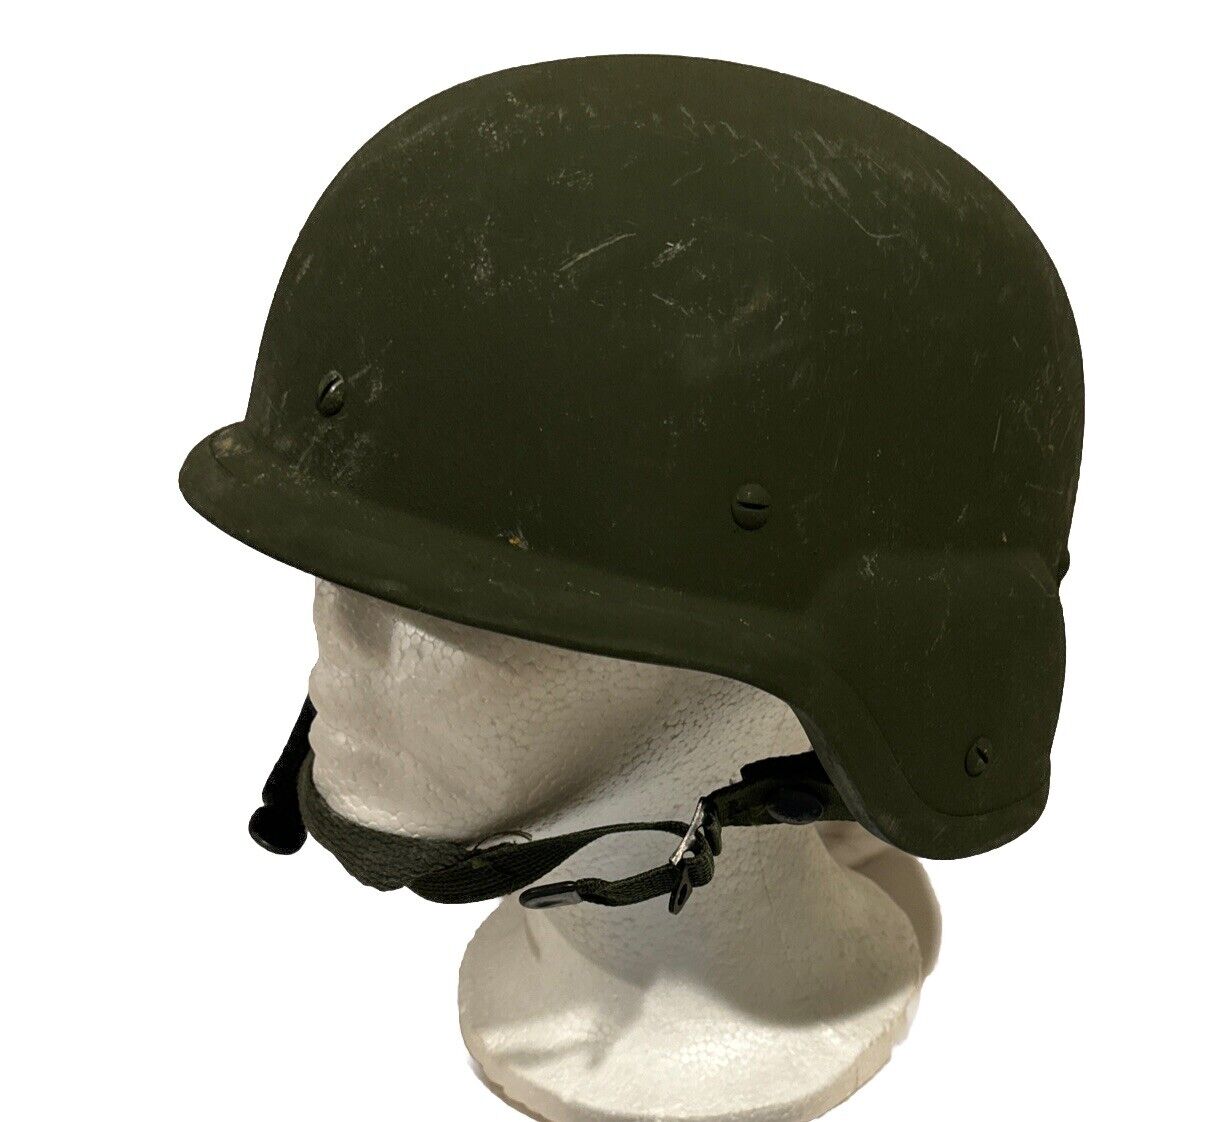 US Army PASGT S-2 Ballistic Military Helmet with Chinstrap